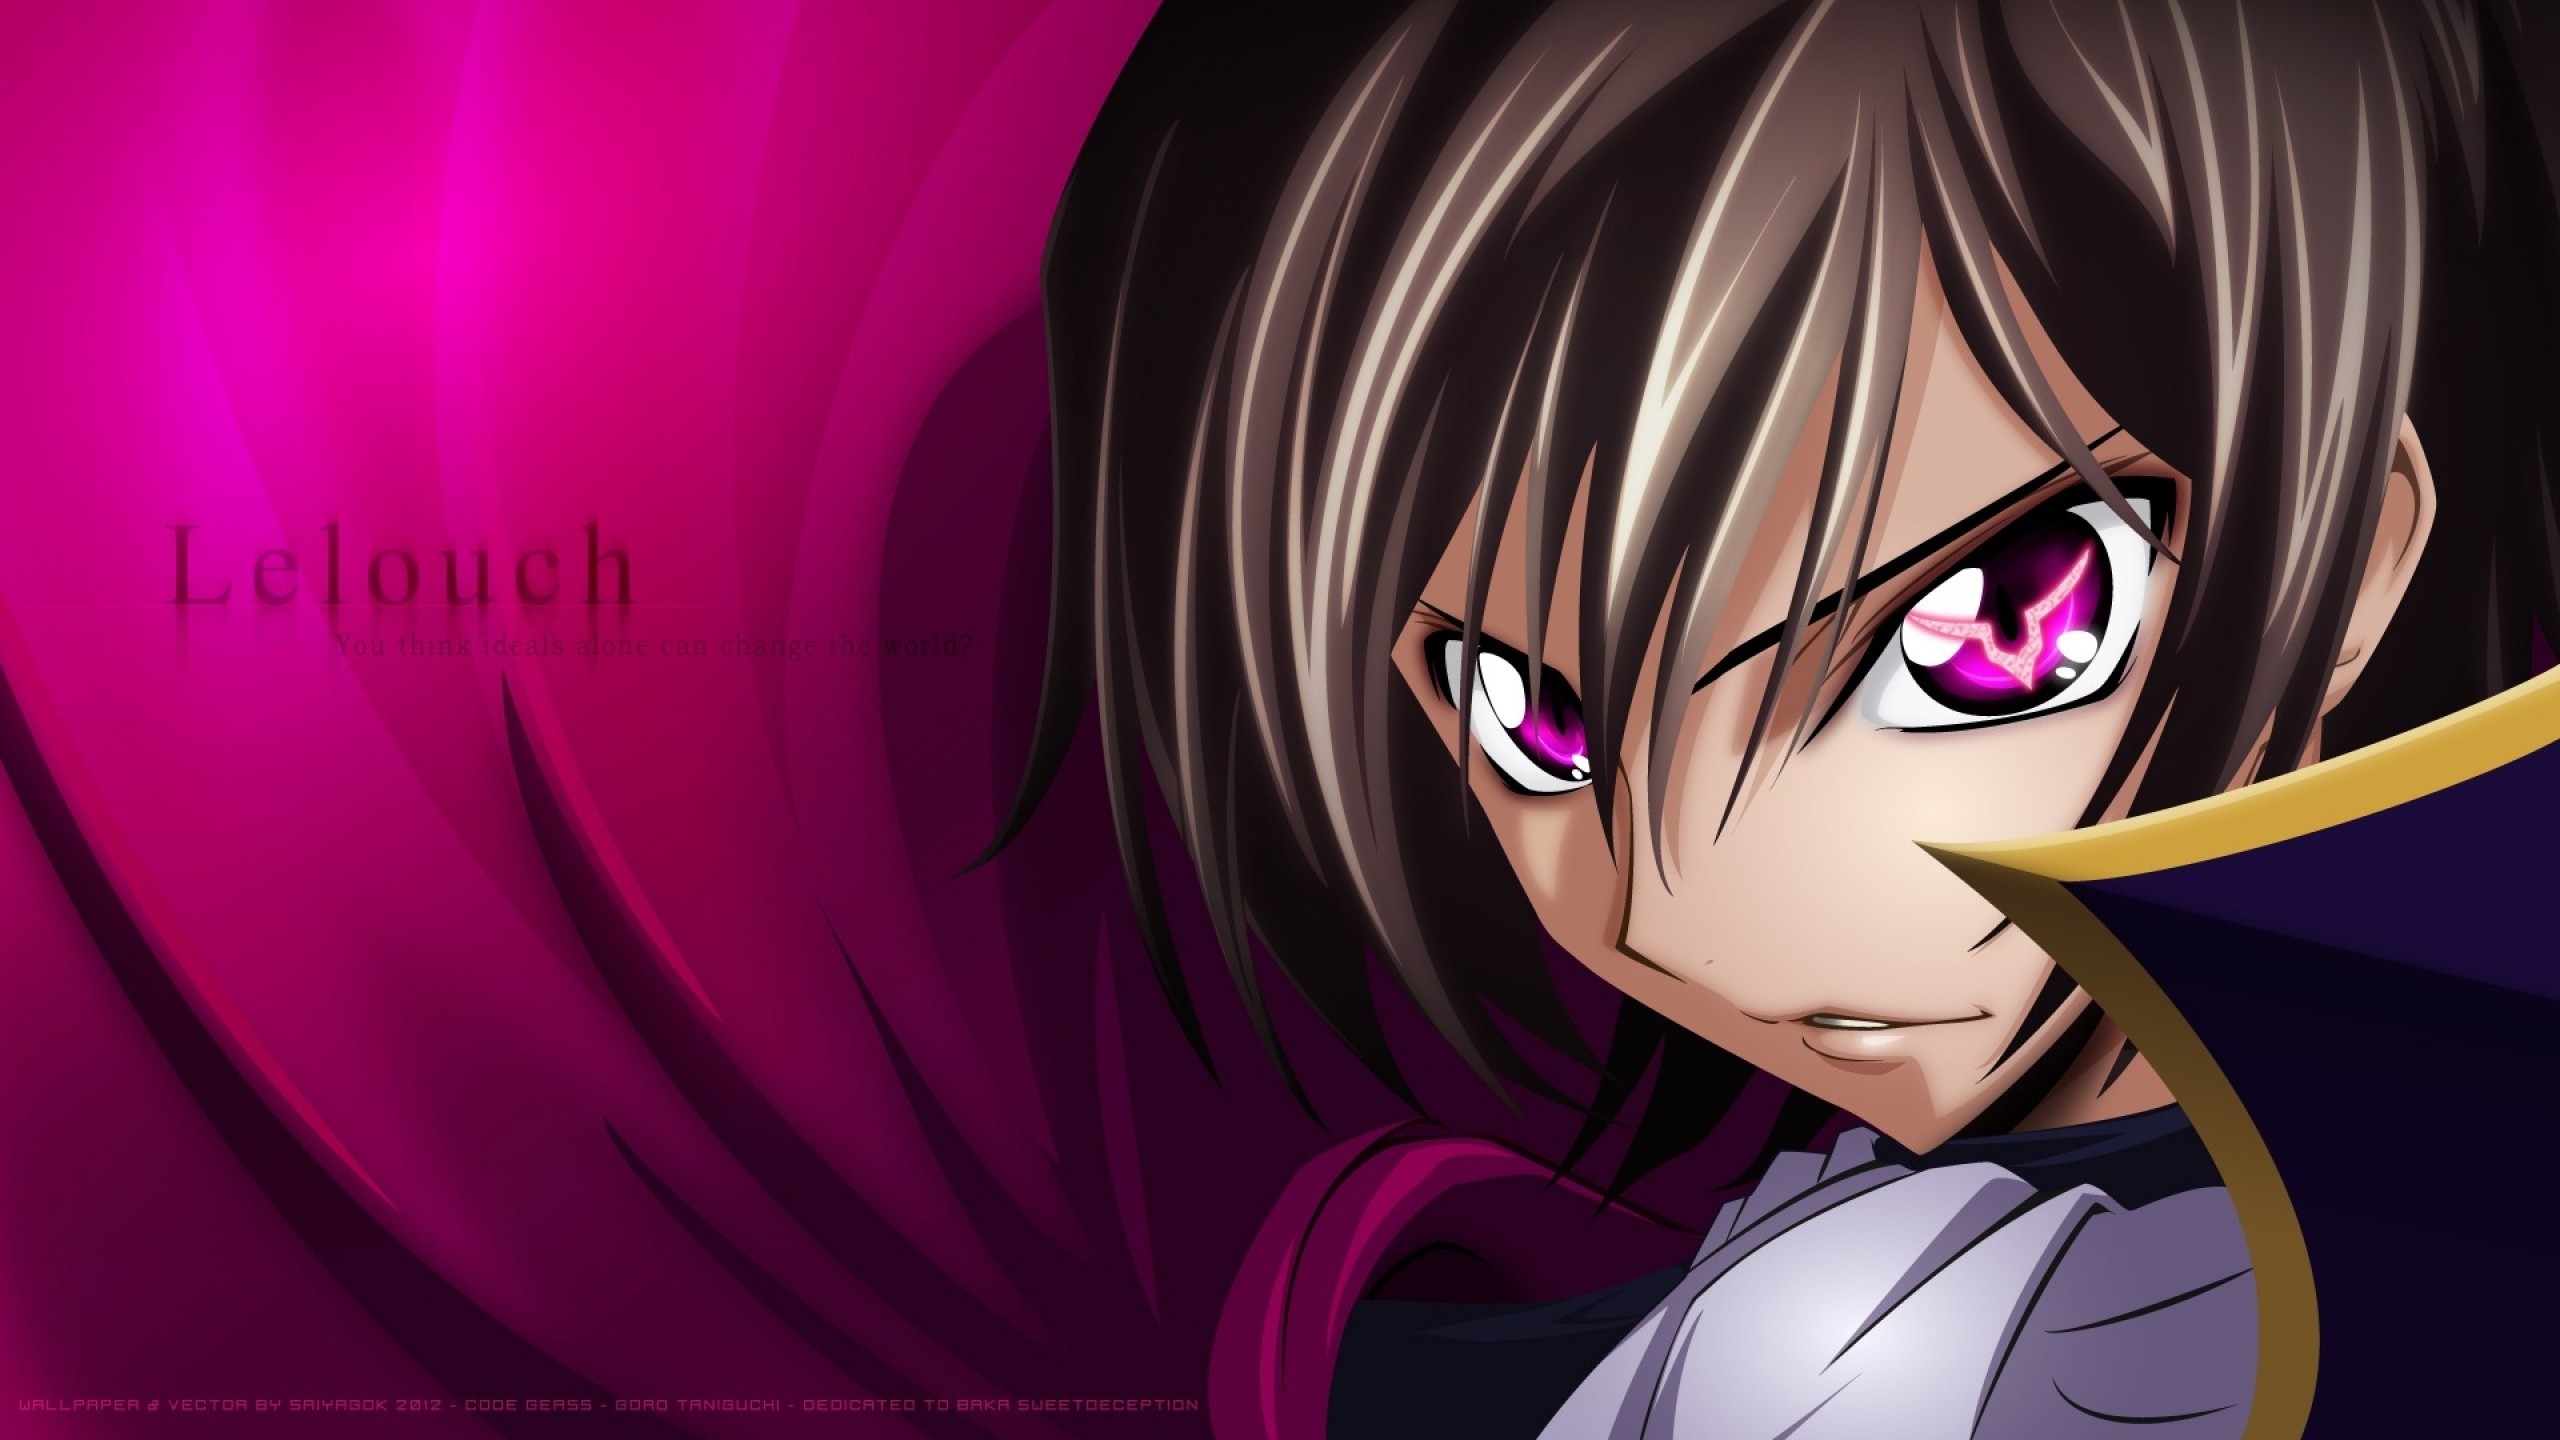 1080x2280 Code Geass Lelouch Lamperouge Anime One Plus 6 Huawei P Honor View 10 Vivo Y85 Oppo F7 Xiaomi Mi Wallpaper Hd Anime 4k Wallpapers Images Photos And Background Wallpapers Den